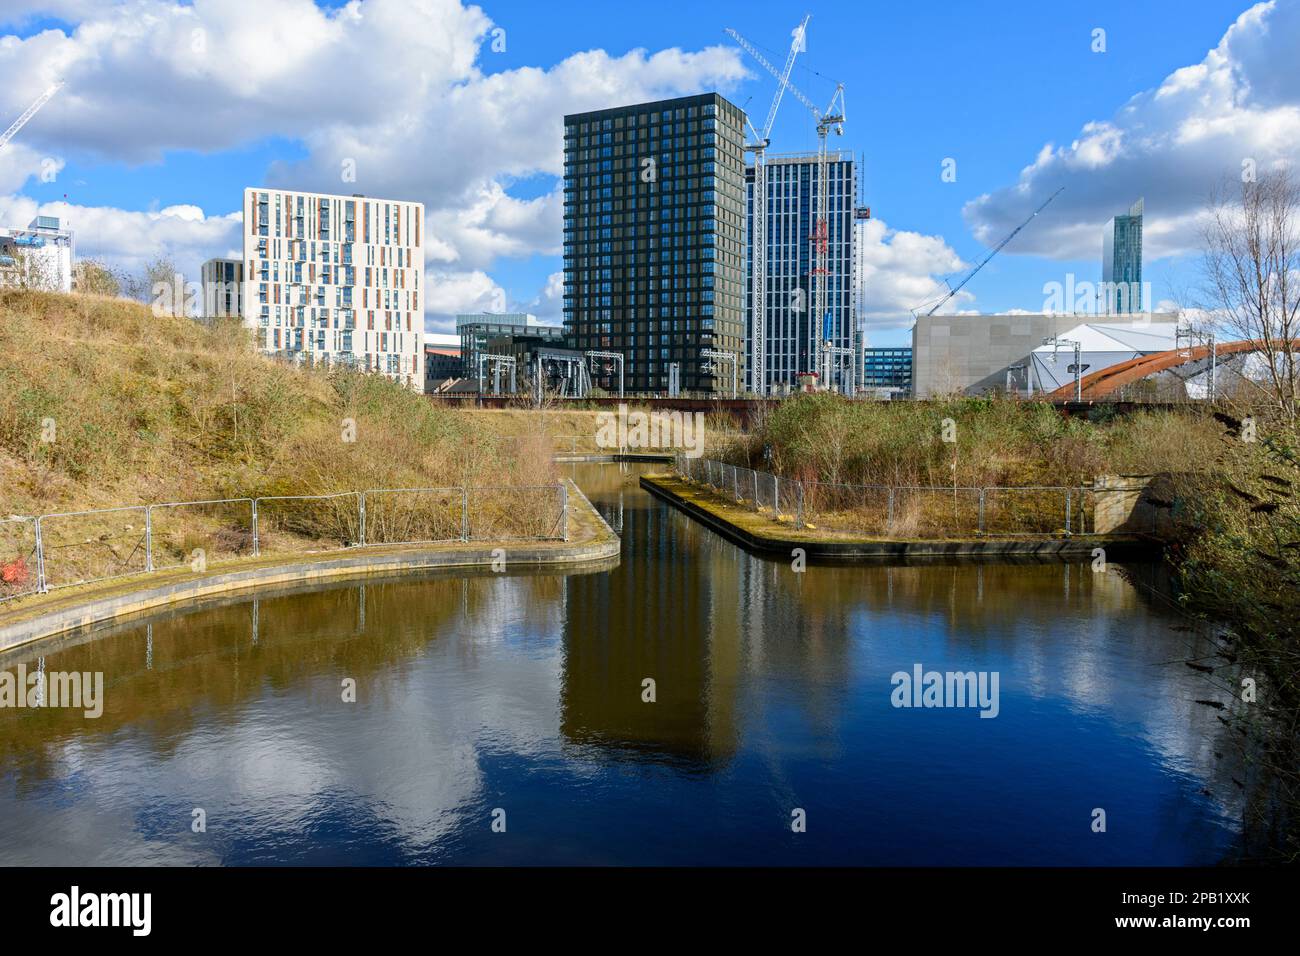 Apartments blocks at the Middlewood Locks development, from the Manchester, Bolton and Bury Canal, Salford, Manchester, England, UK Stock Photo